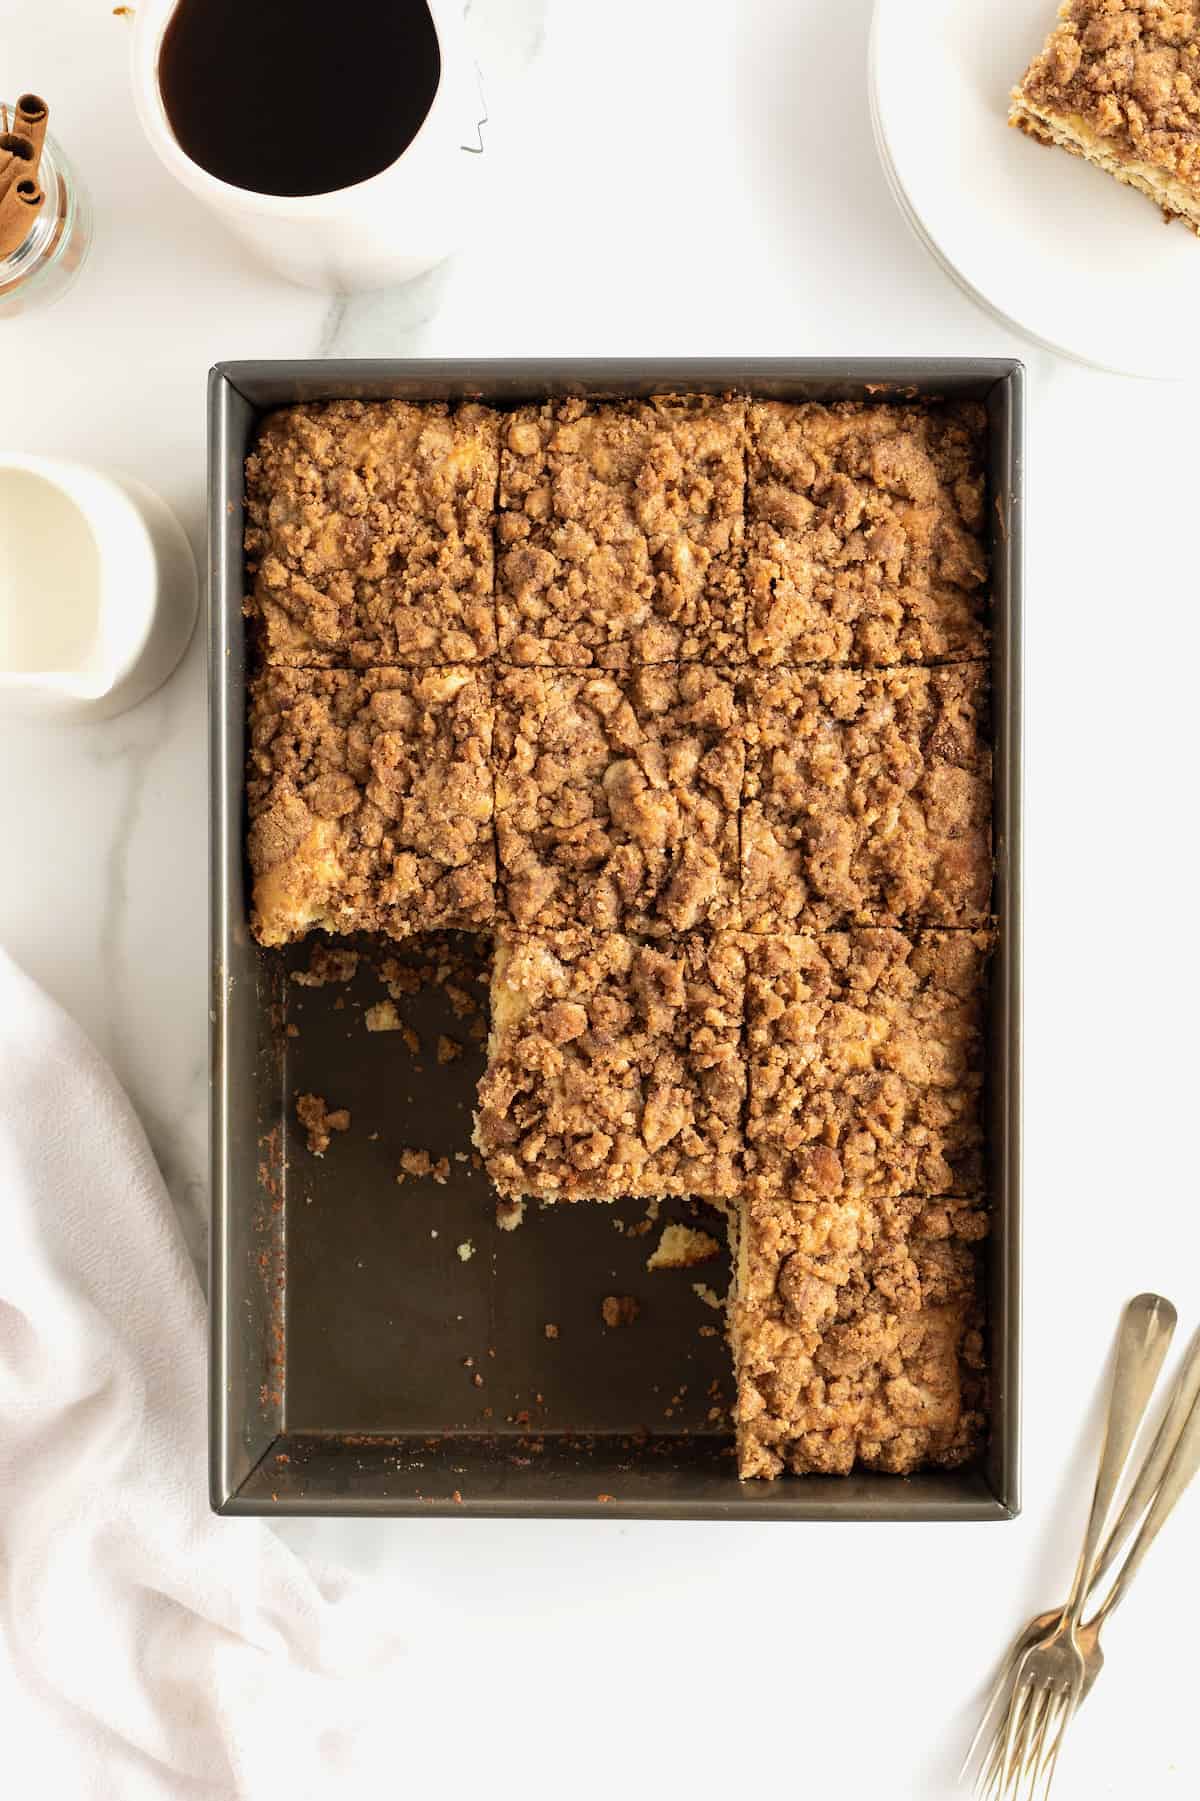 A rectangle metal baking pan of coffee cake with three slices cut out.